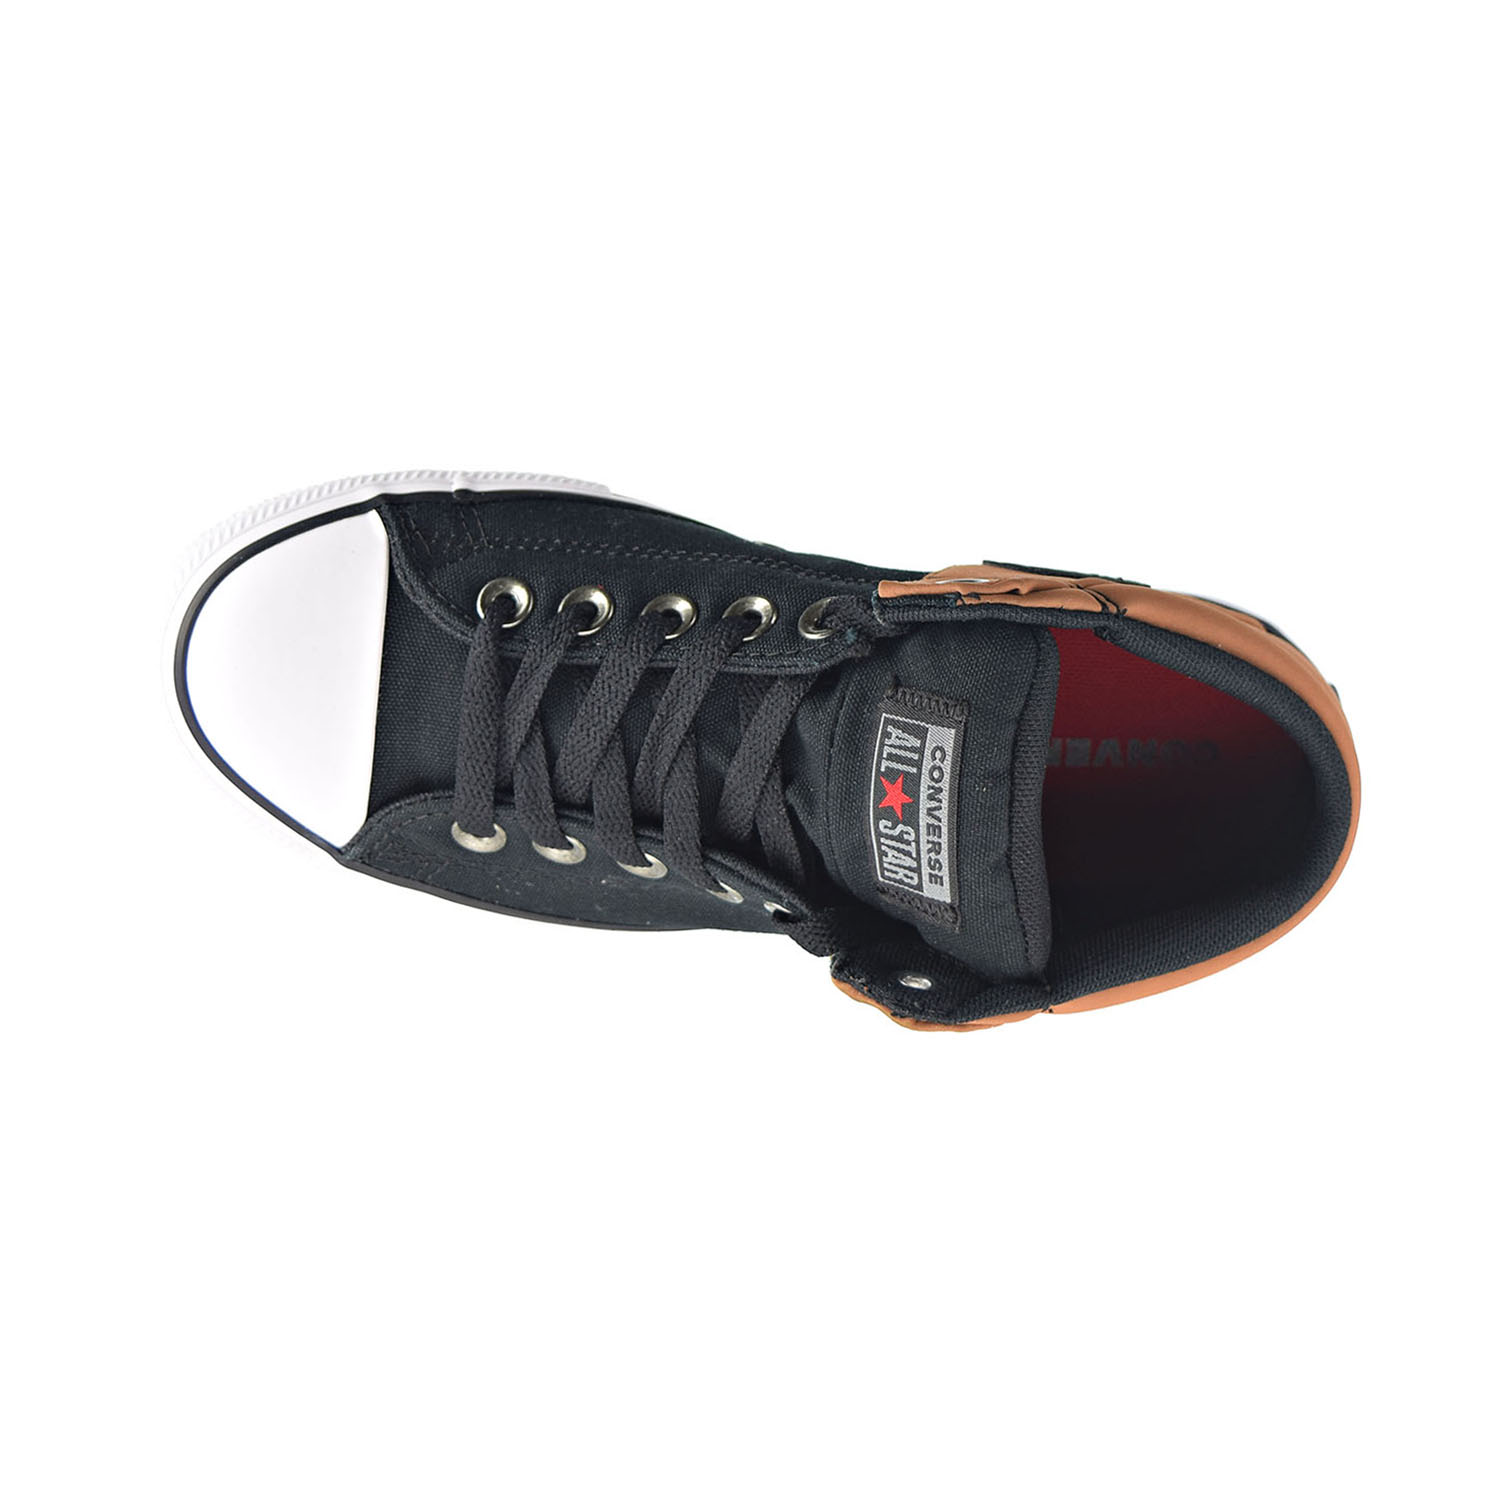 Converse Chuck Taylor All Star Axel Mid Kids' Shoes Black-Warm Tan-White 666065f - image 5 of 6